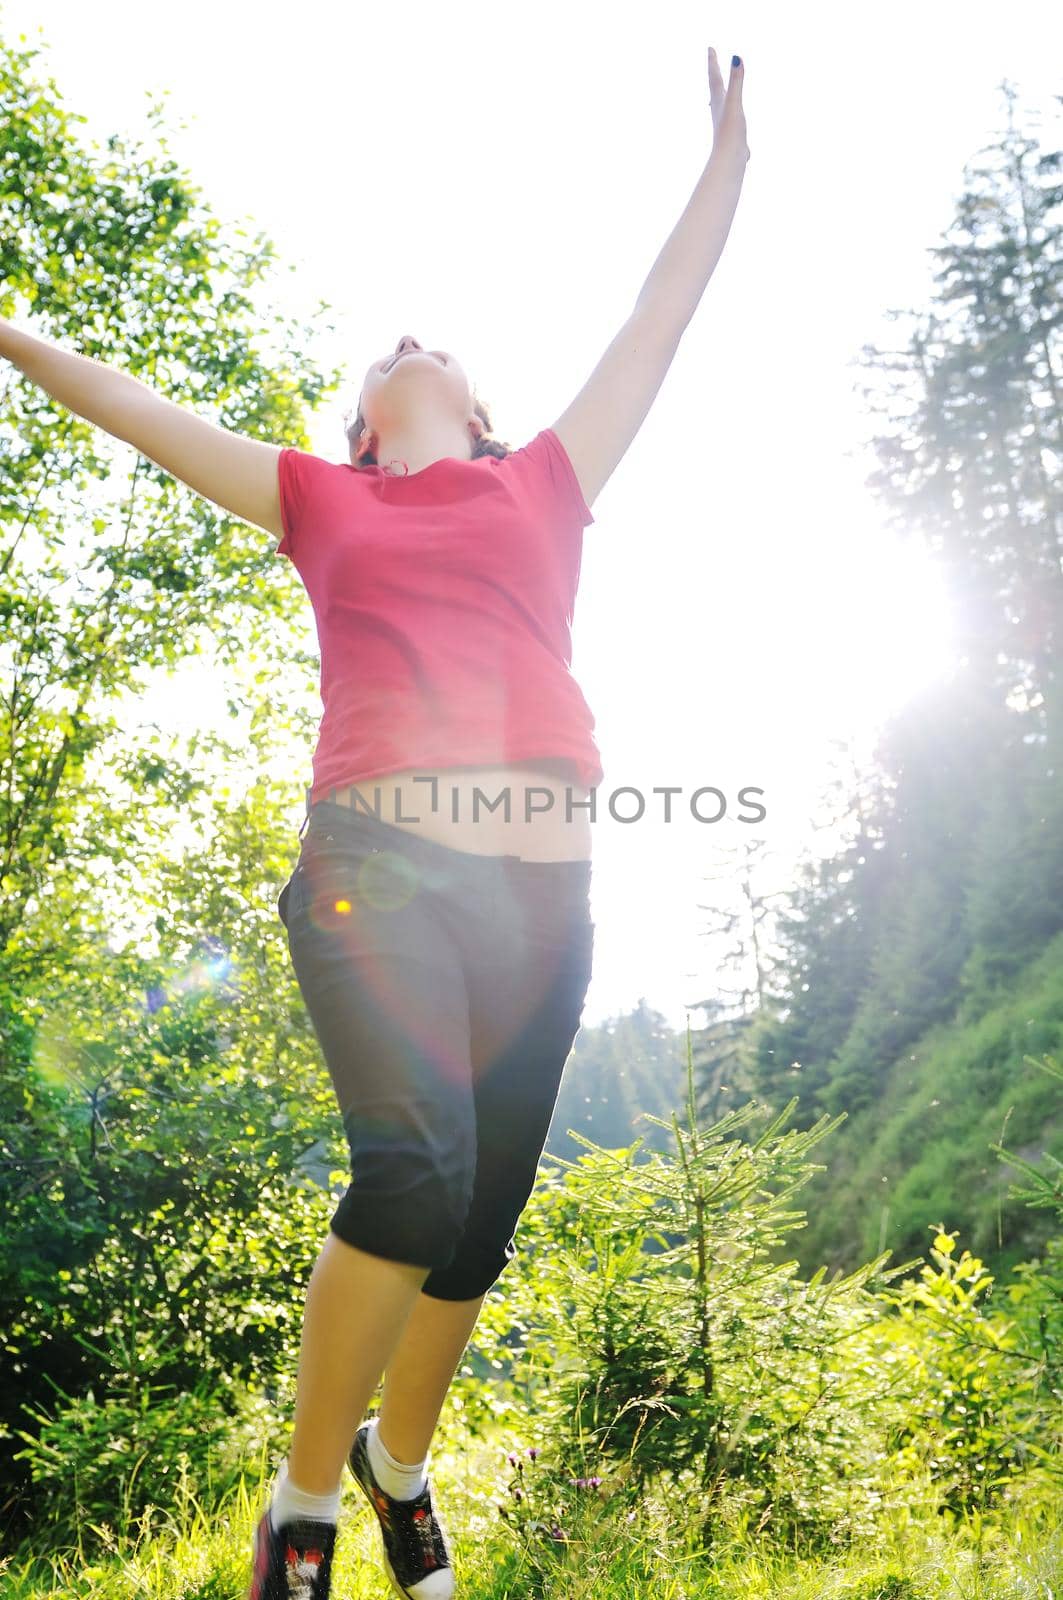 happy girl jump in air outdoor in nature